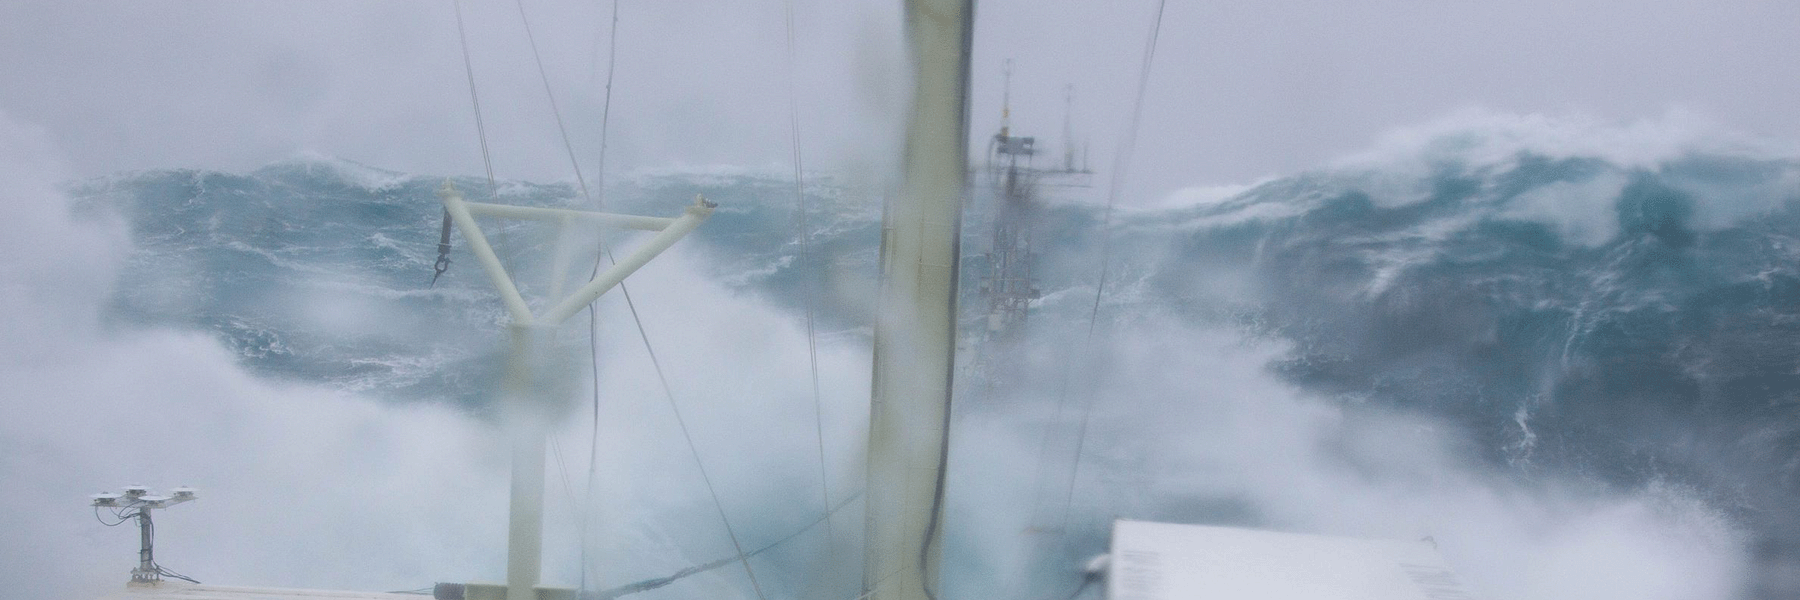 View from bridge of R/V Knorr during a storm in the HiWinGS field program